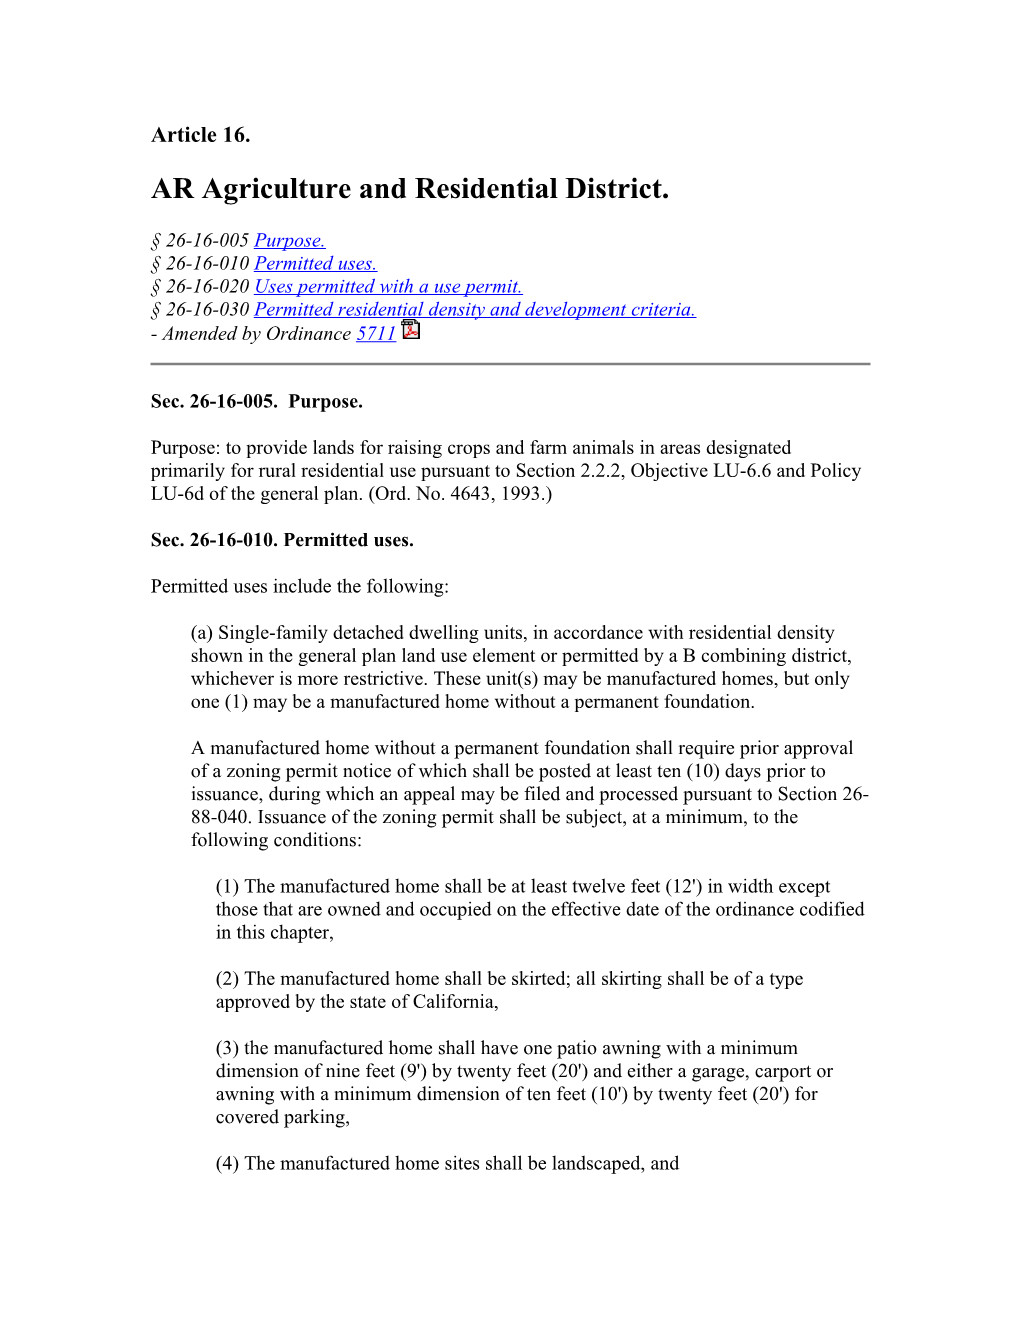 AR Agriculture and Residential District